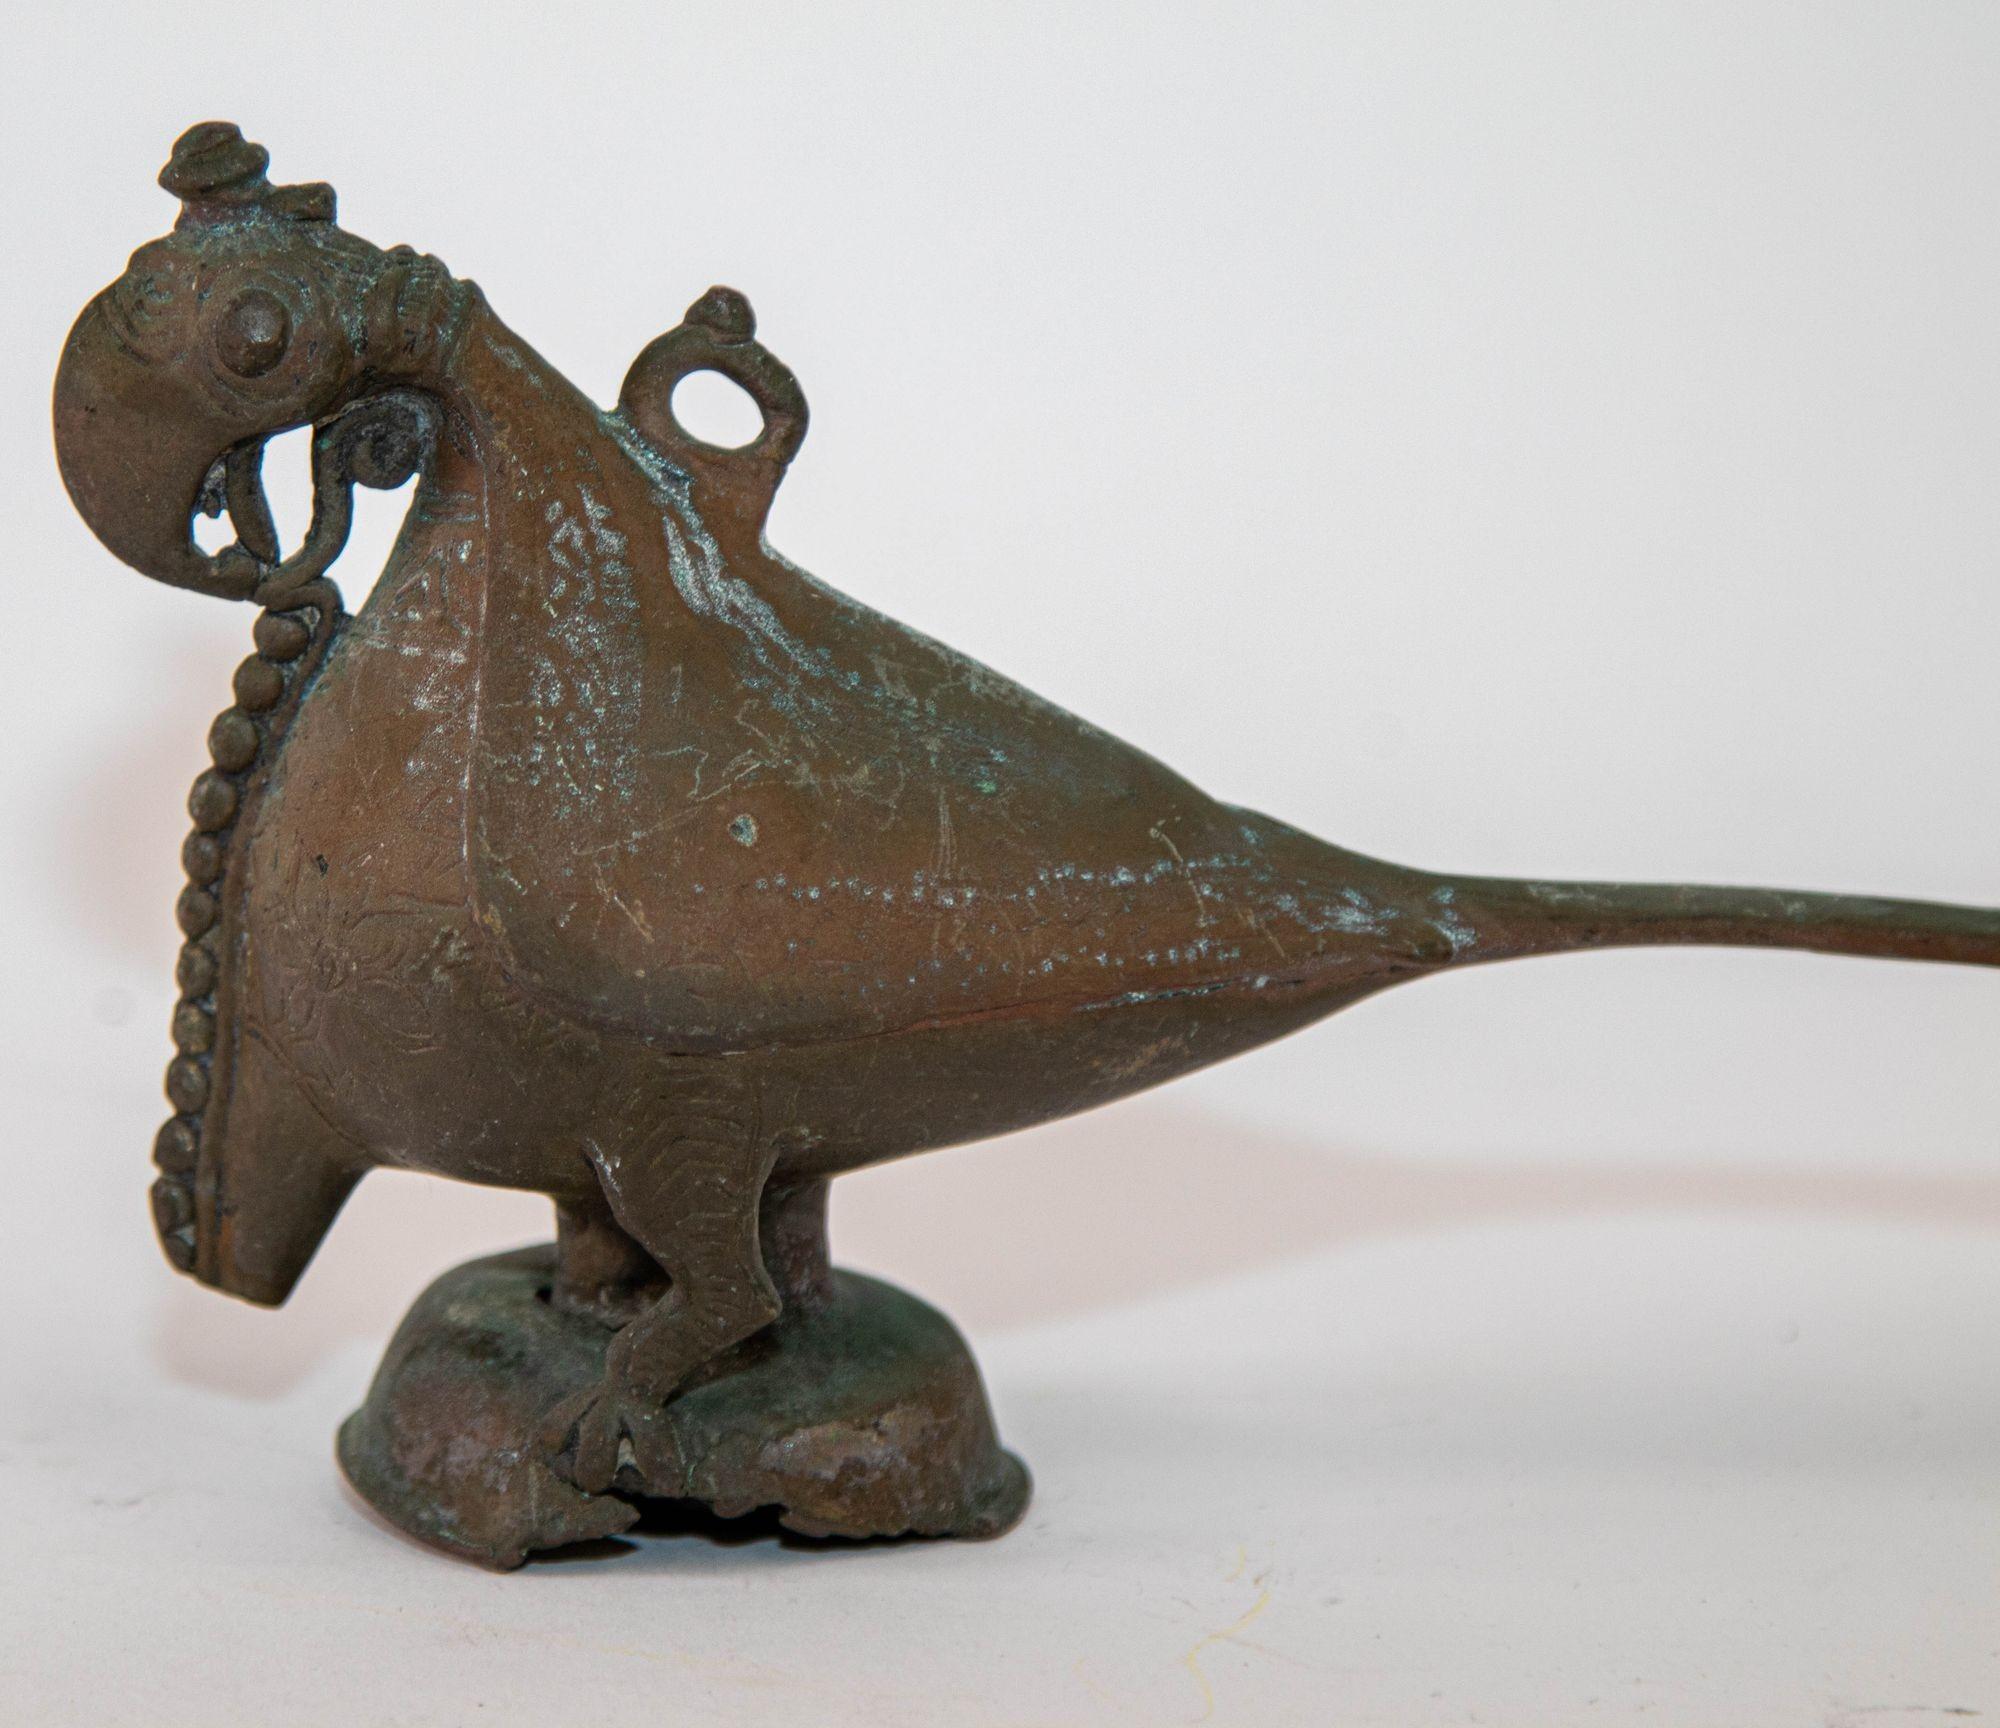 Antique Indian Bronze Parrot Figure oil Lamp Rajasthan, Bronze Hamsa Lamp Finial, North India, 19th Century of before.
The engraved scrolling decoration on this antique oil container has been completely worn away in some areas leaving a smooth,